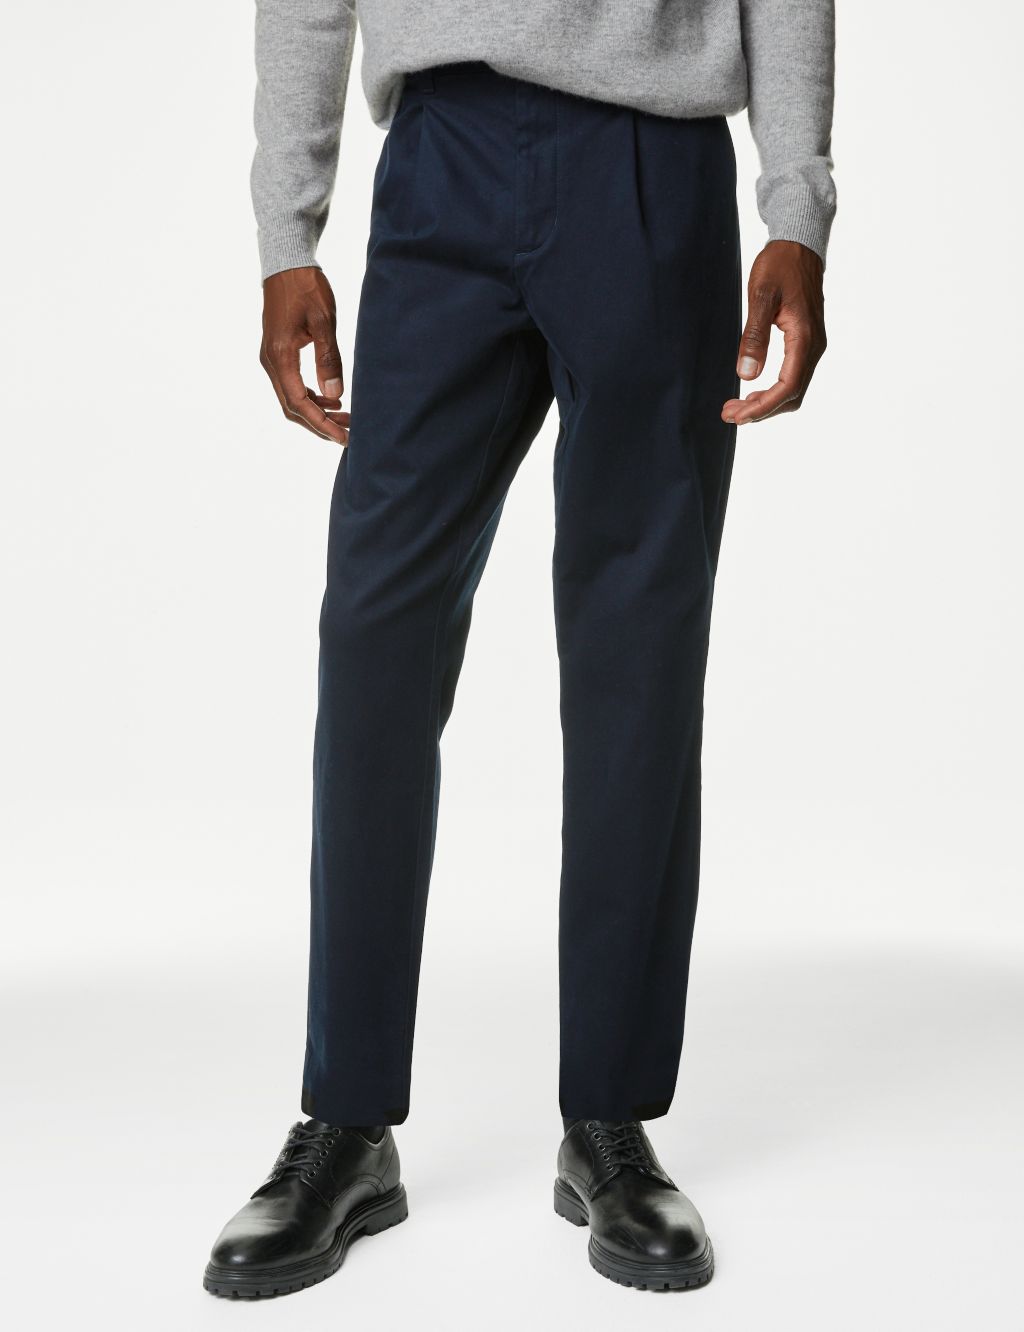 Tapered Fit Half-Elasticated Waist Chinos image 4